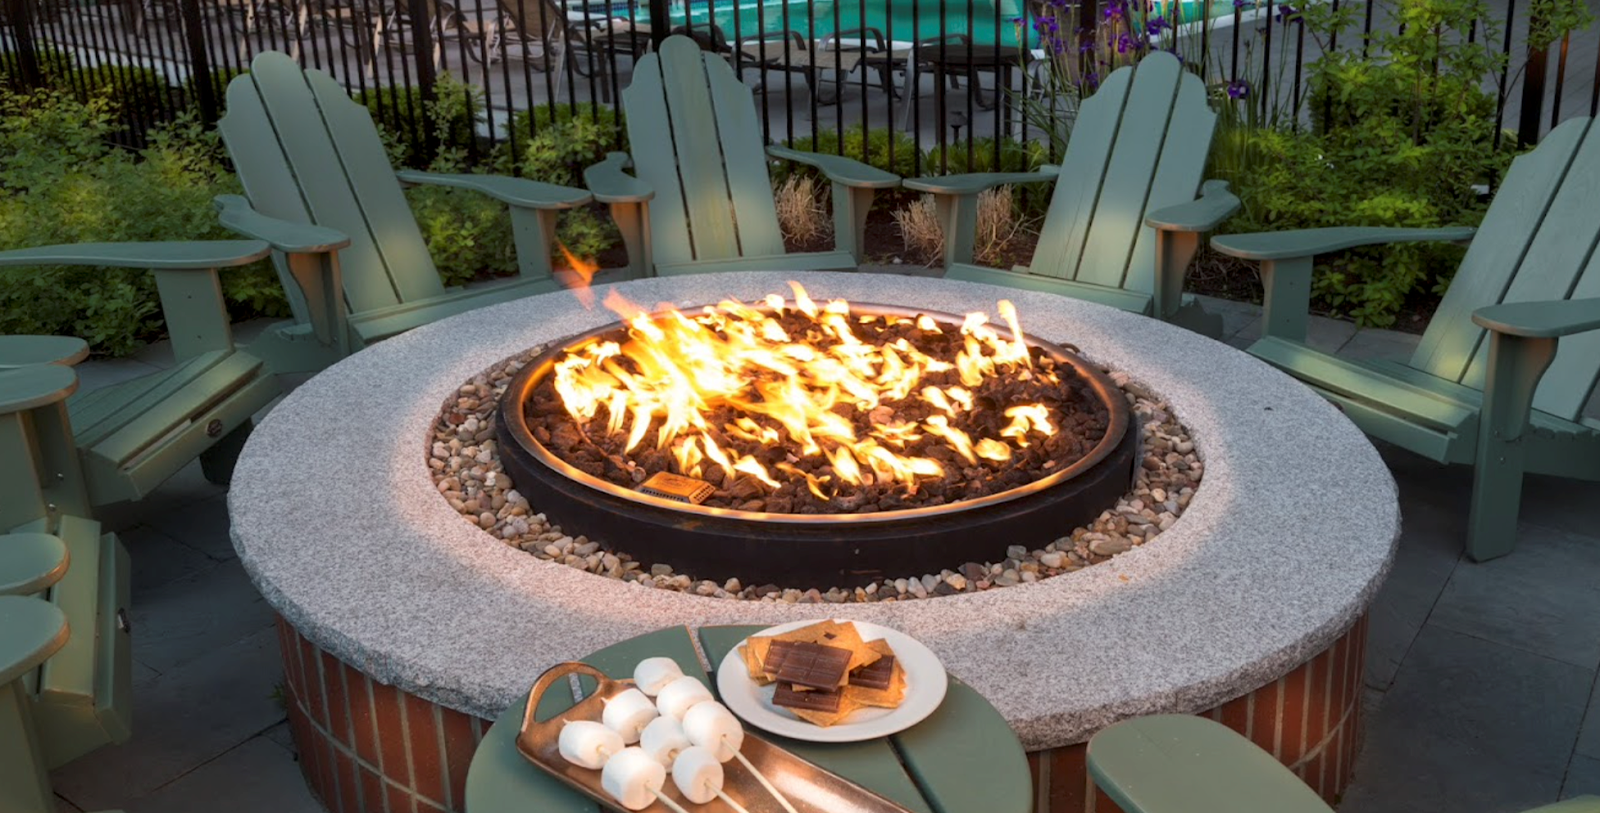 Experience the cozy ambiance of roasting s’mores at the Firepit on the Inn’s grounds.